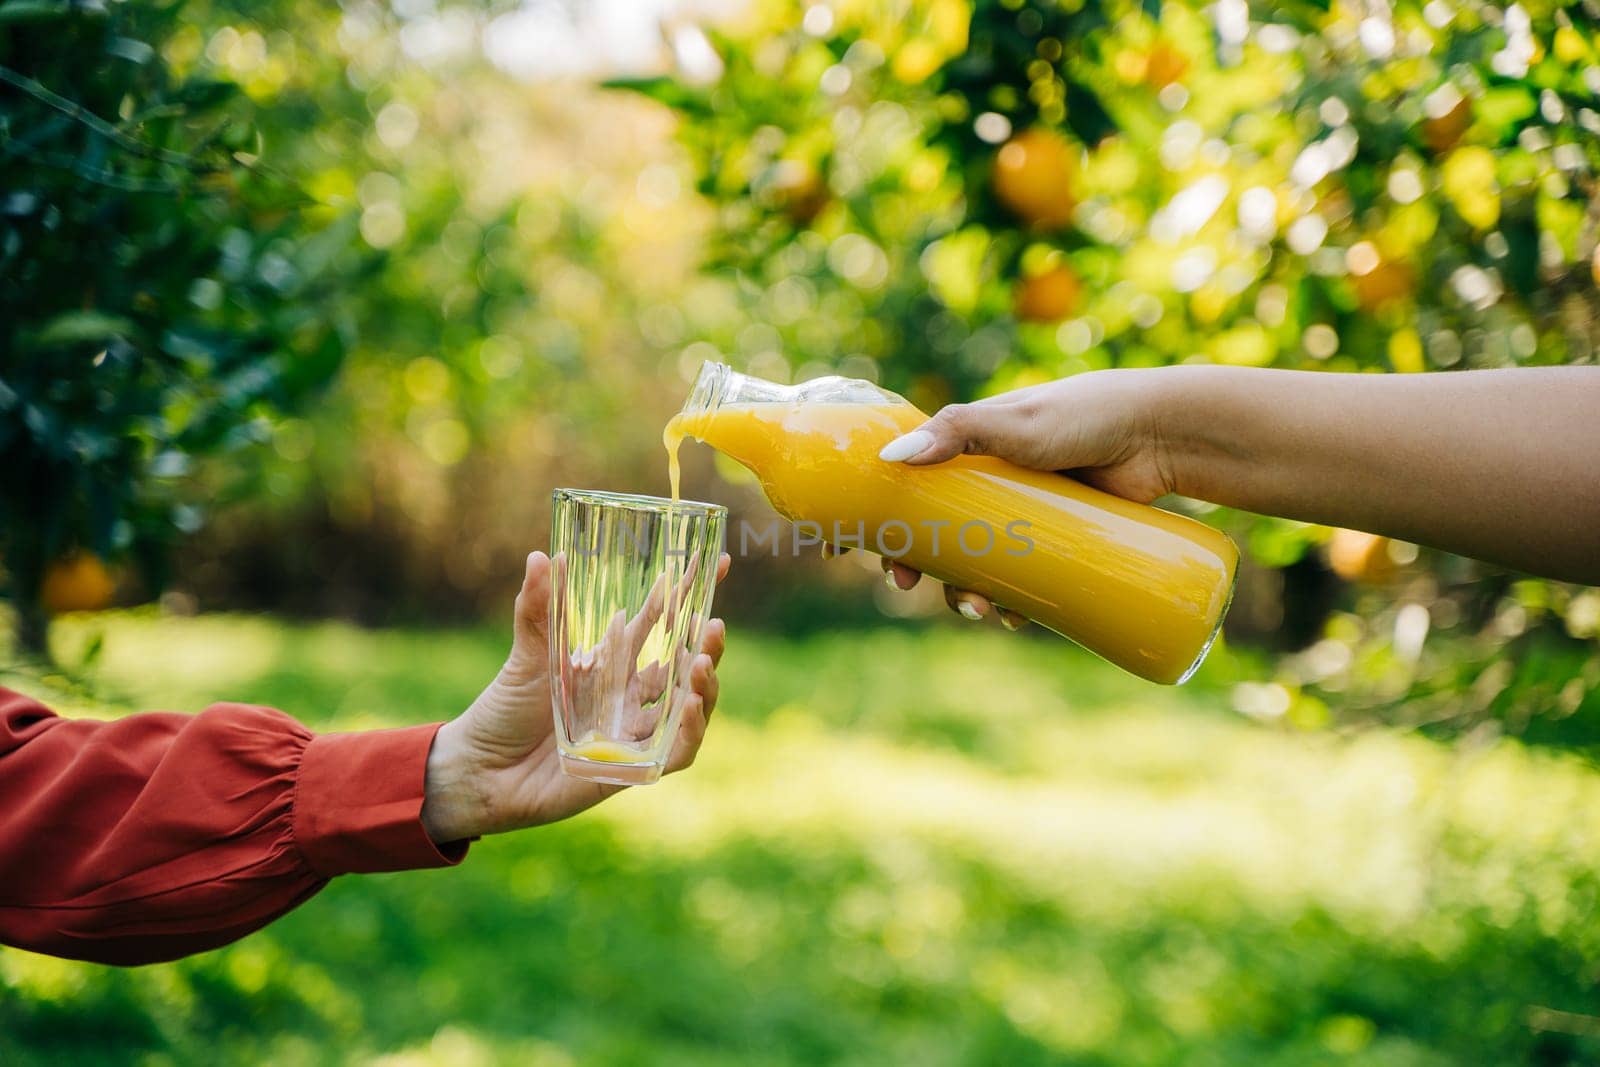 Mother's female hand pours fresh organic orange citrus juice lemonade into glass, that child's hand is holding with the orangery orchard fruit garden trees in the background. by Ostanina